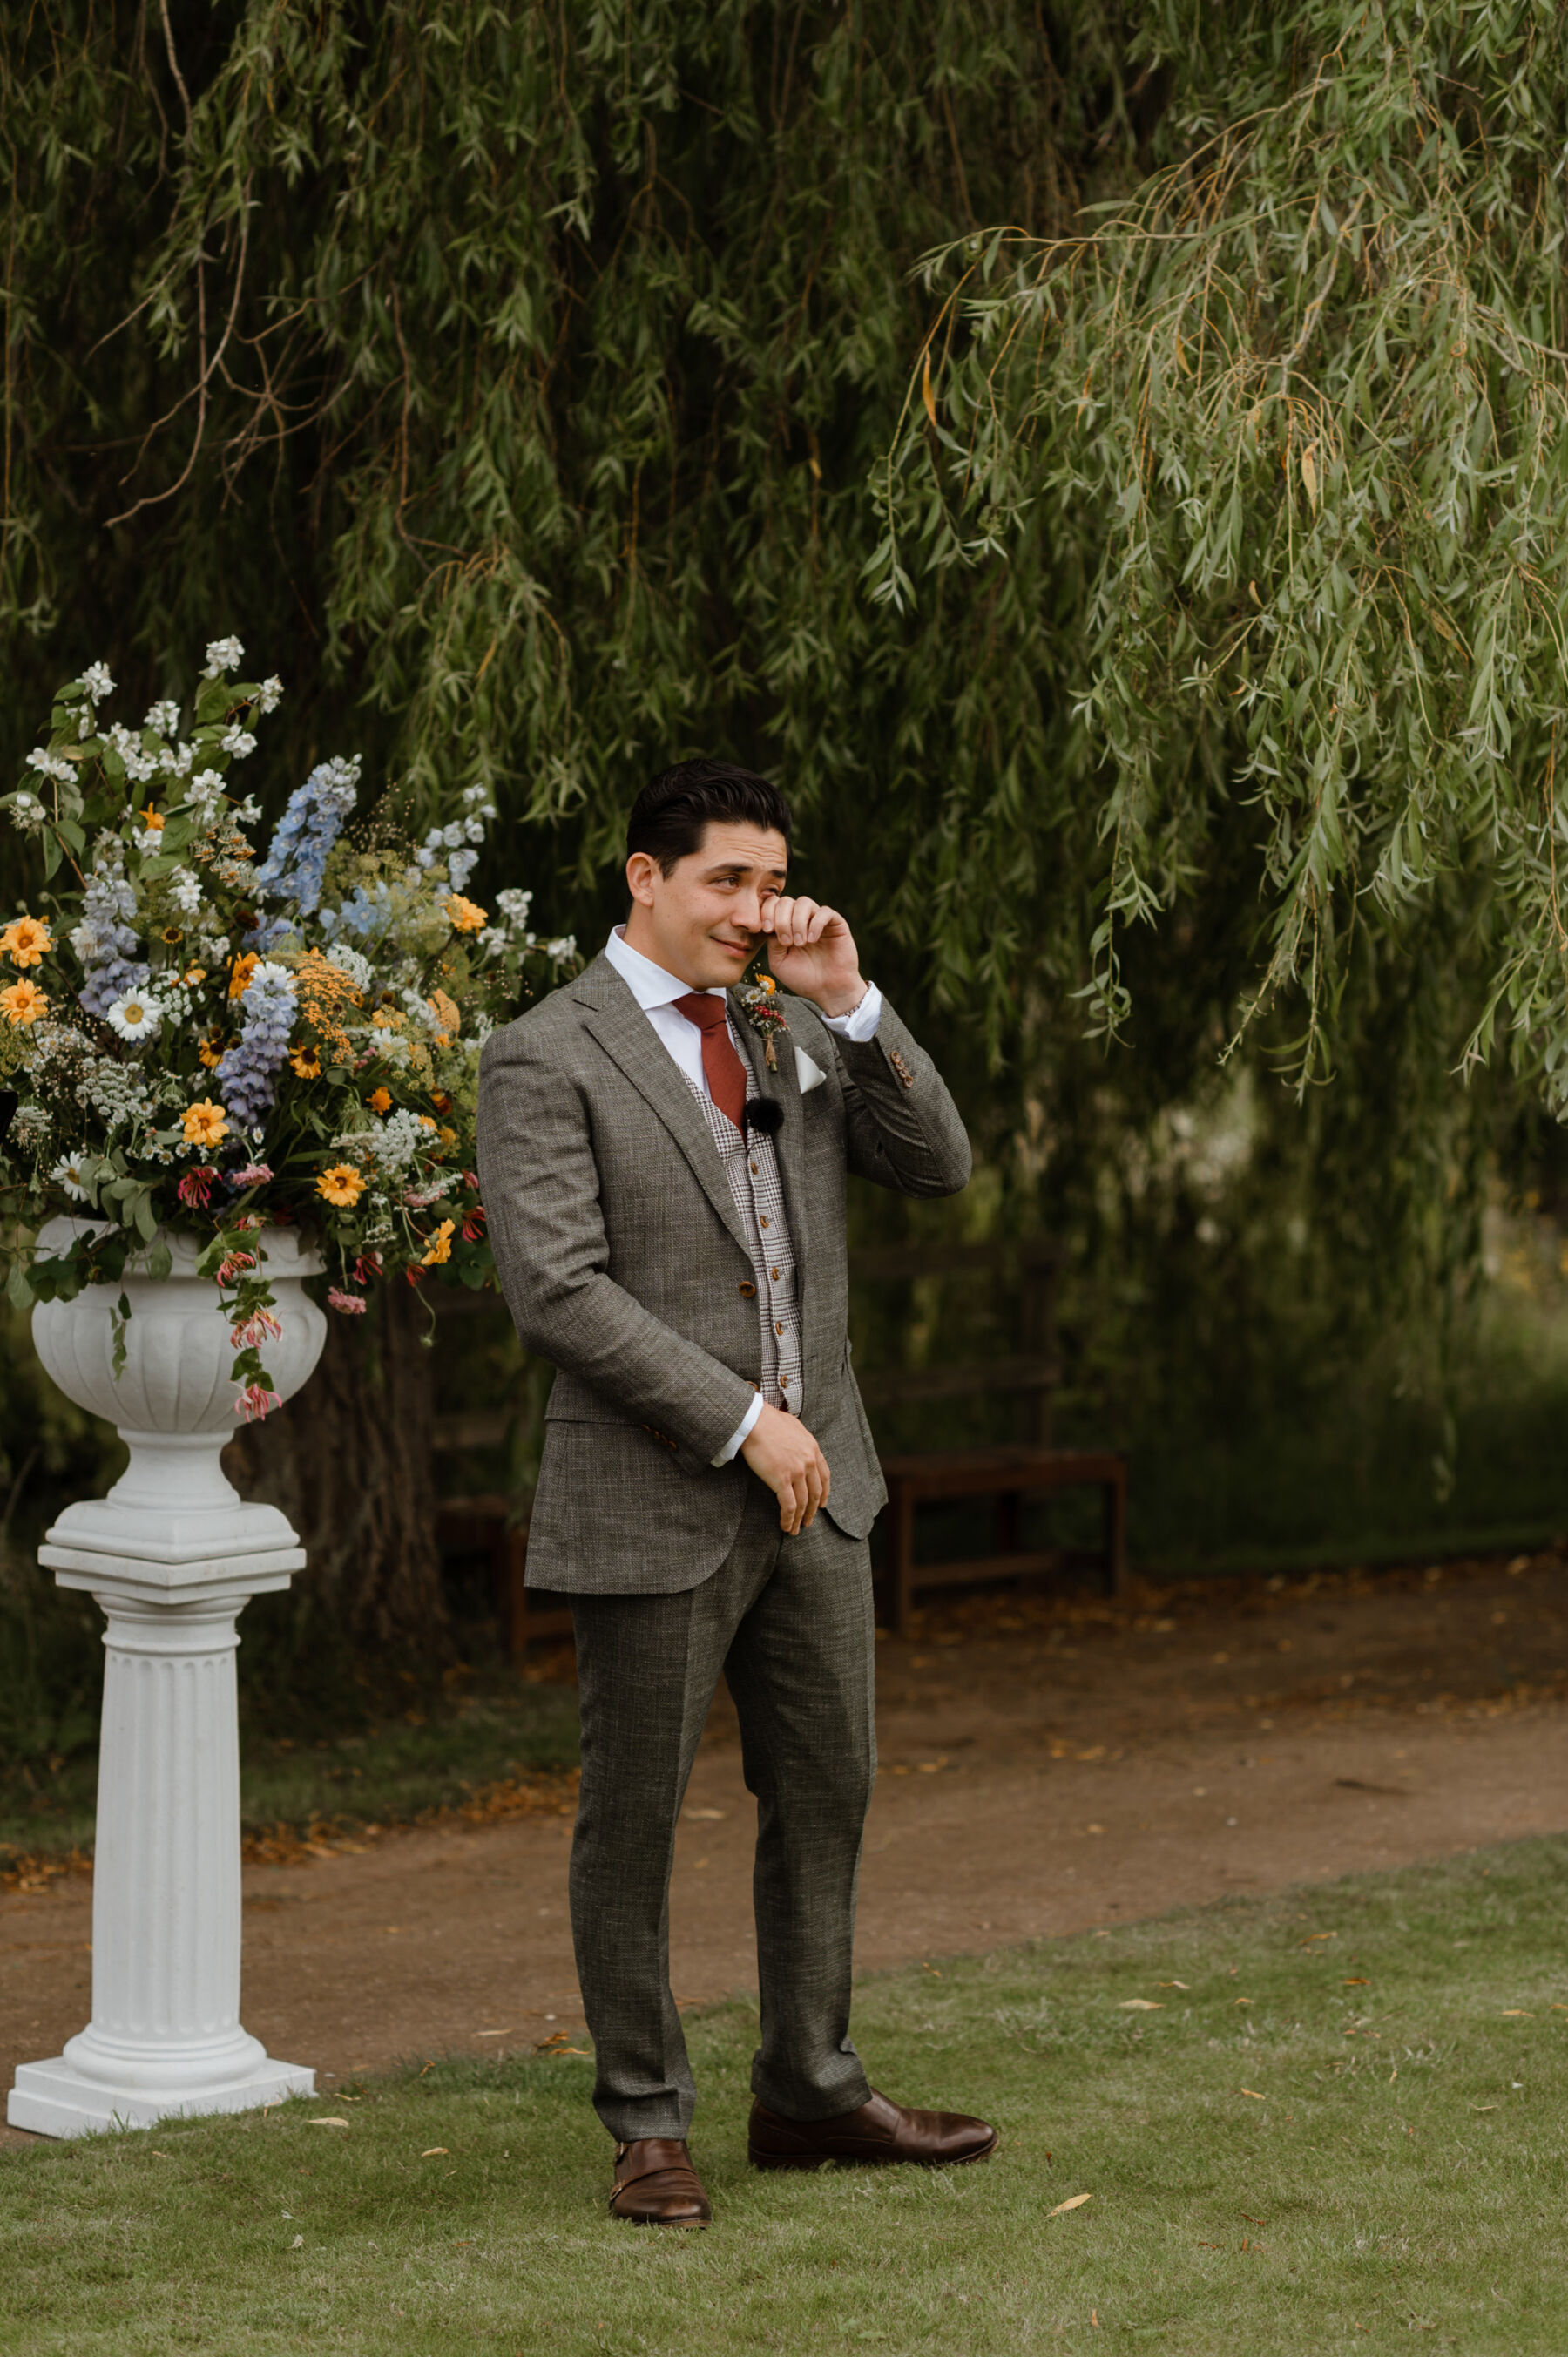 Groom wiping away tears as he watches his bride walk down the aisle